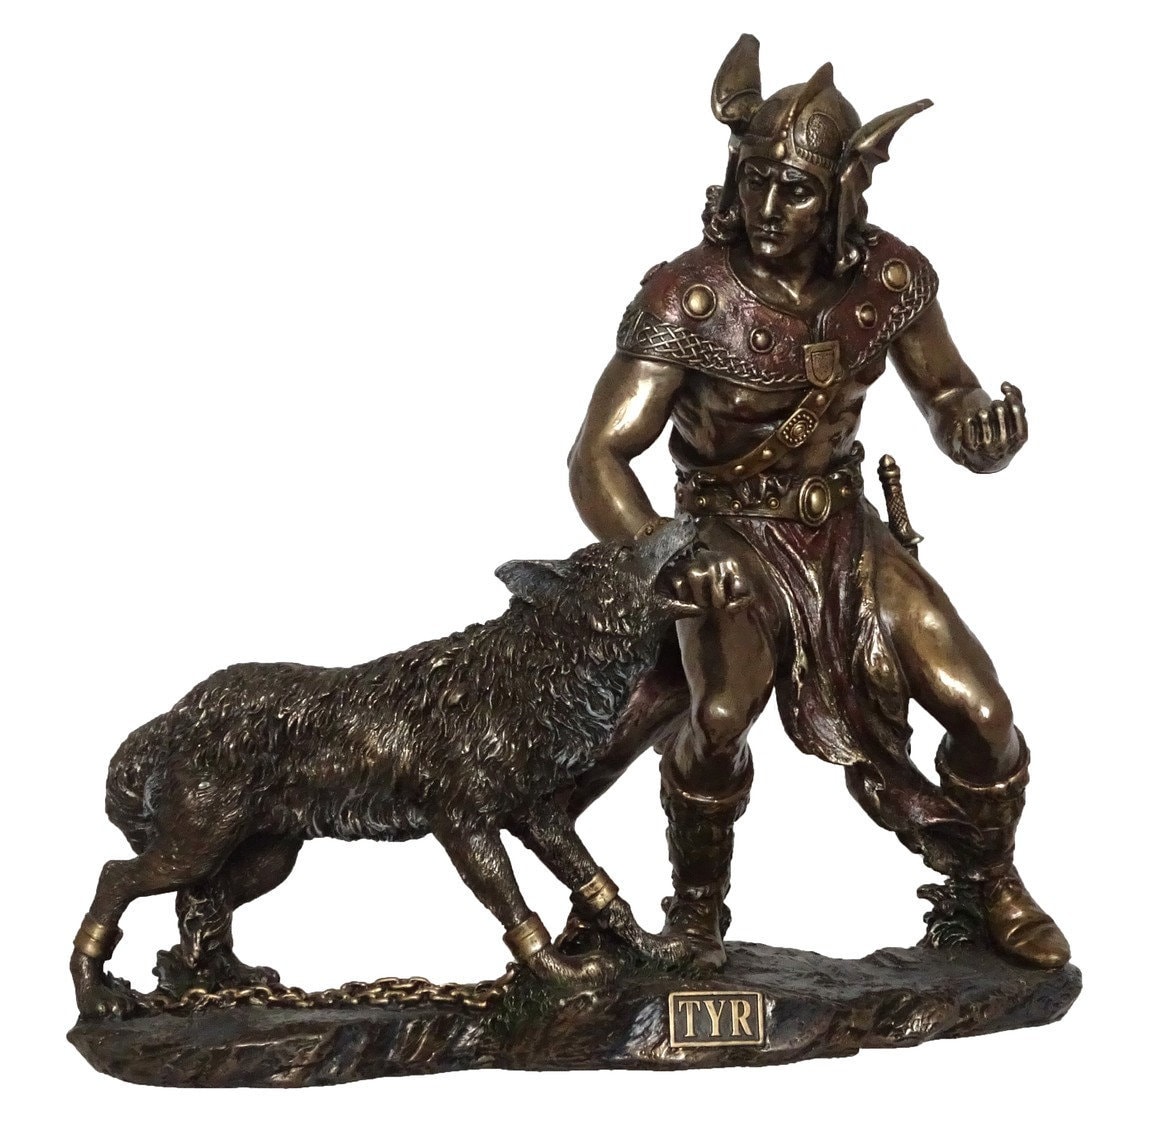 Tyr And The Binding of Fenrir Statue, Norse God Of War Sculpture